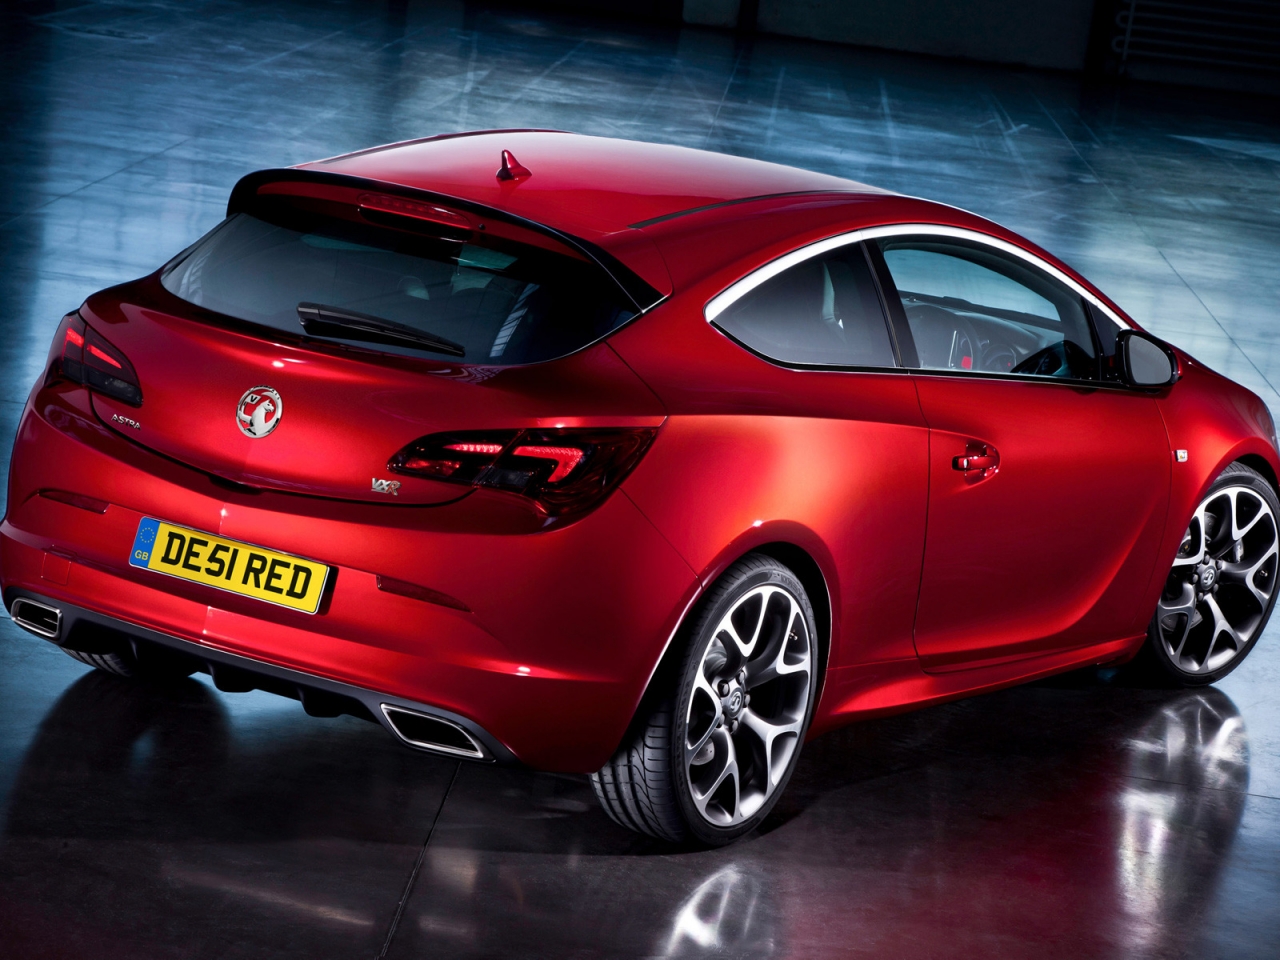 Vauxhall Astra GTC Rear for 1280 x 960 resolution